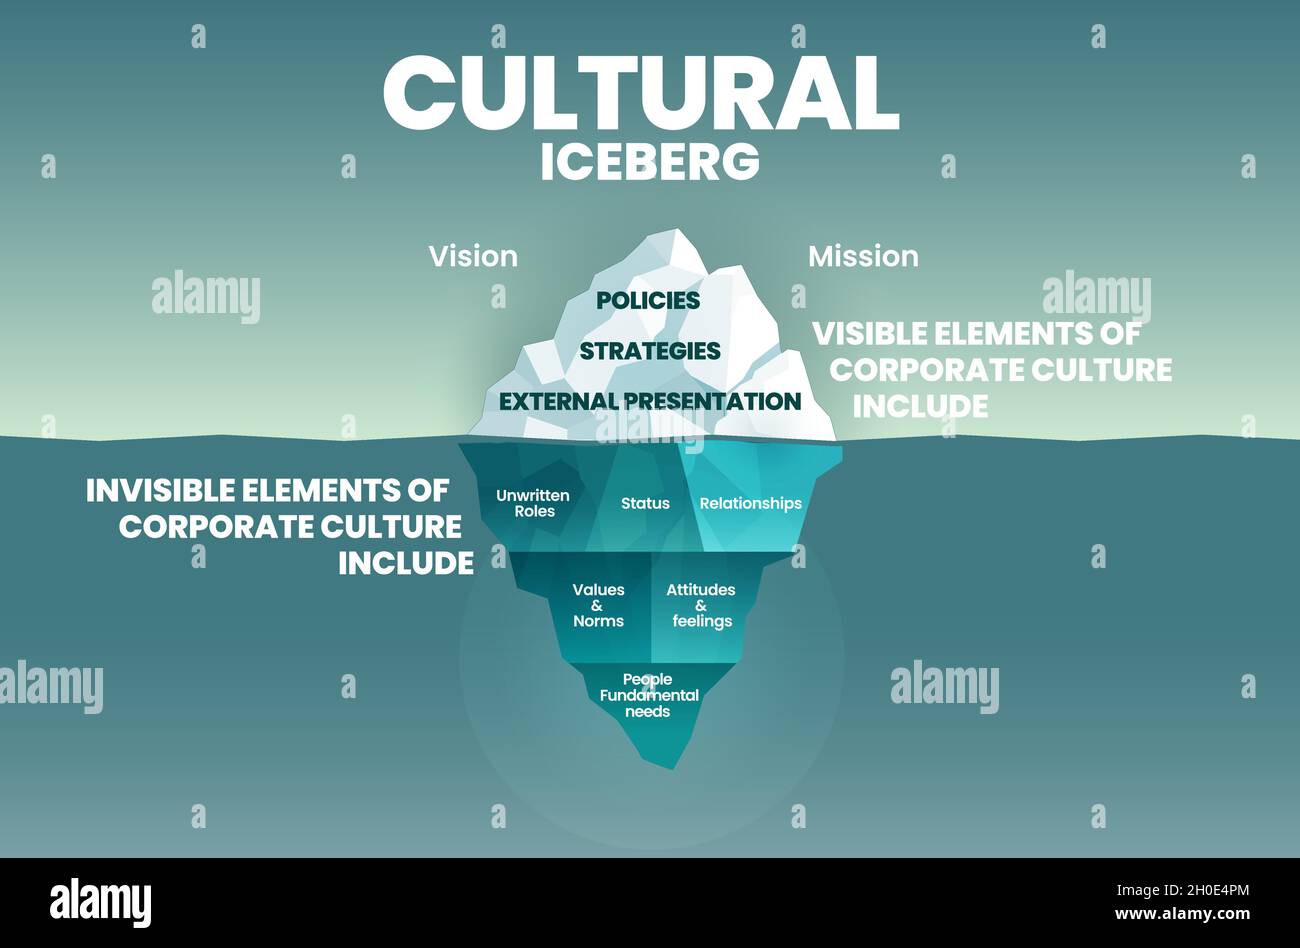 Corporate cultural iceberg template on surface is visible elements and ...